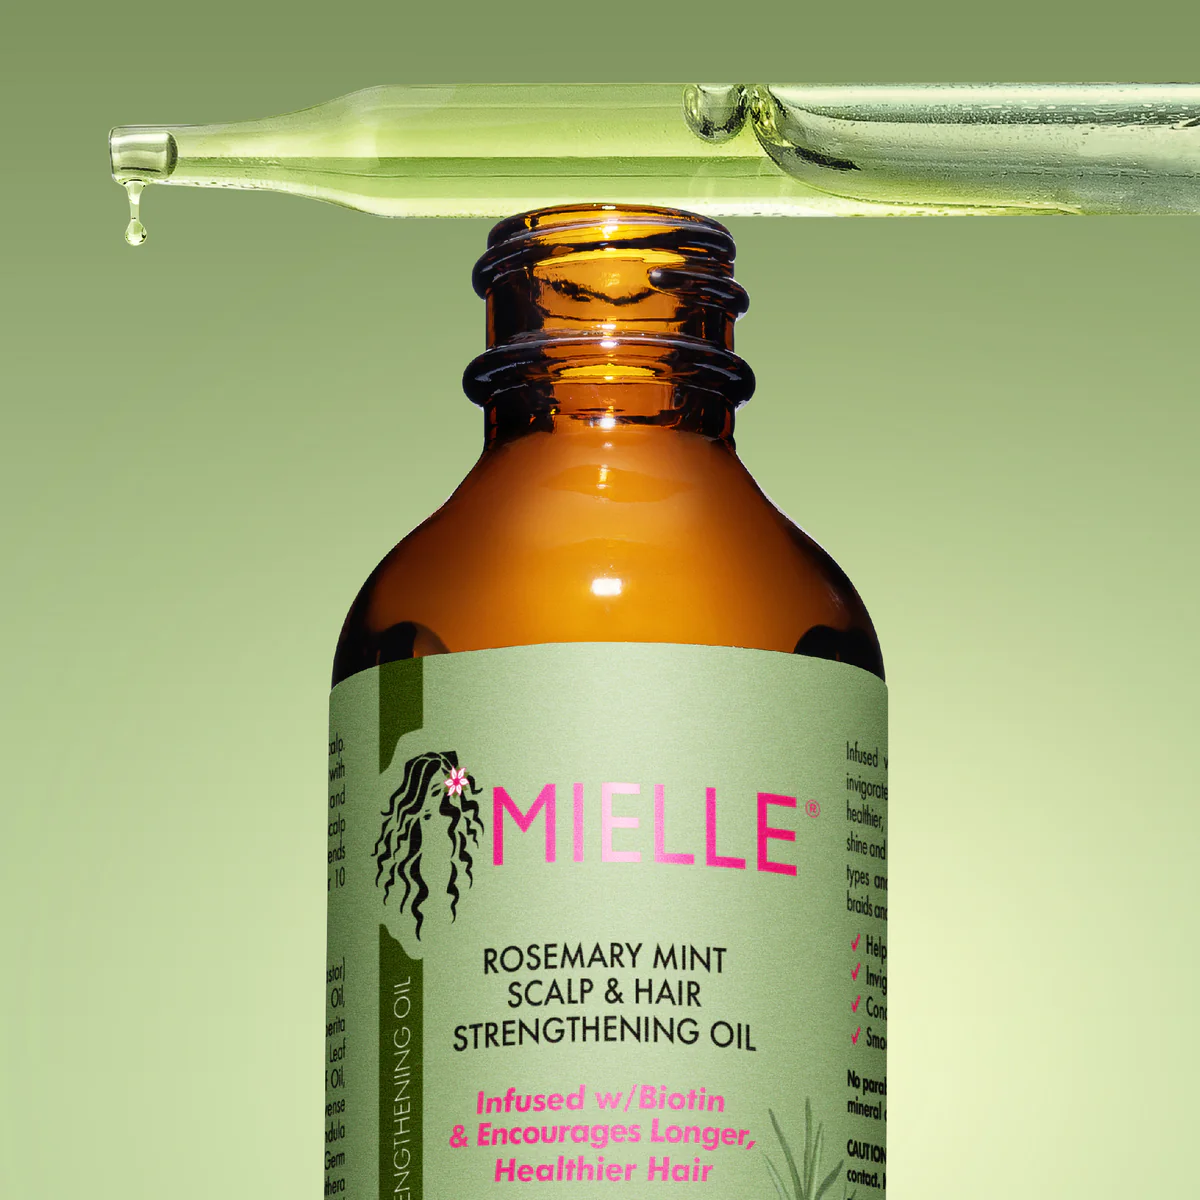 The Success Of Mielle Organics Rosemary Mint Oil